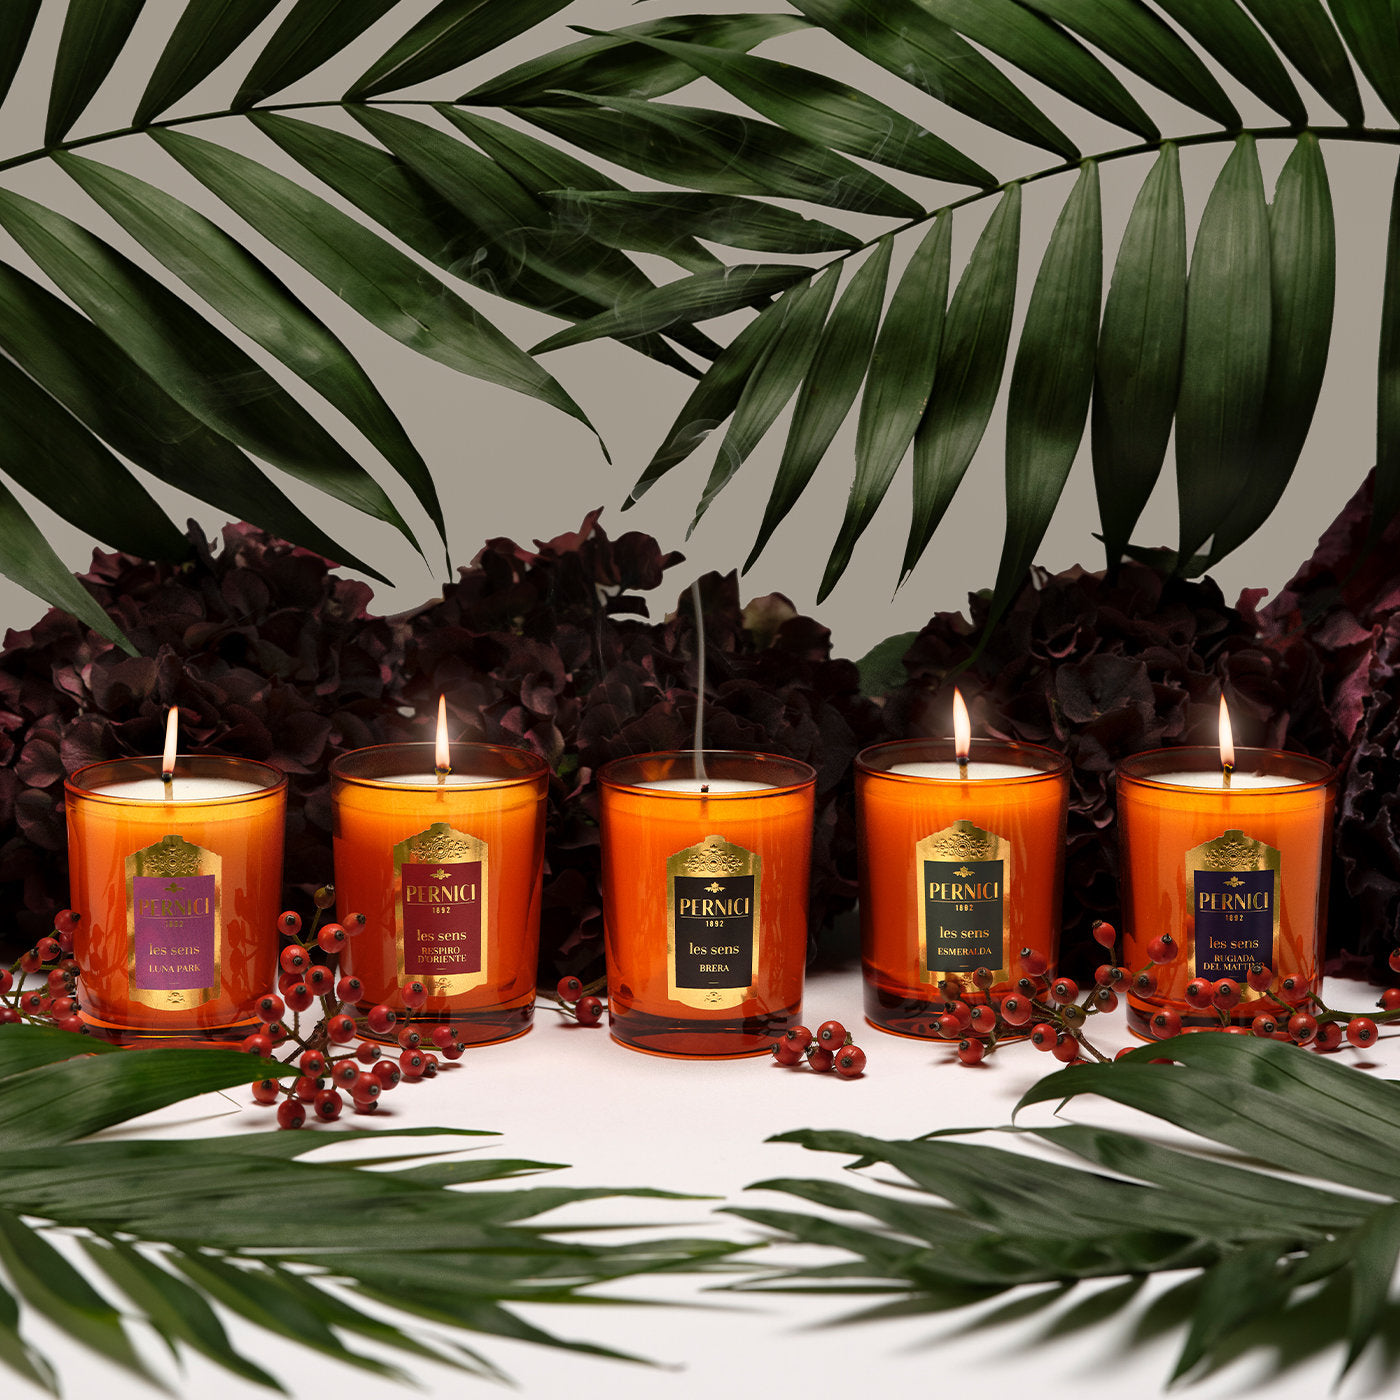 Les Sens Set of 5 Small Scented Candles - Alternative view 2